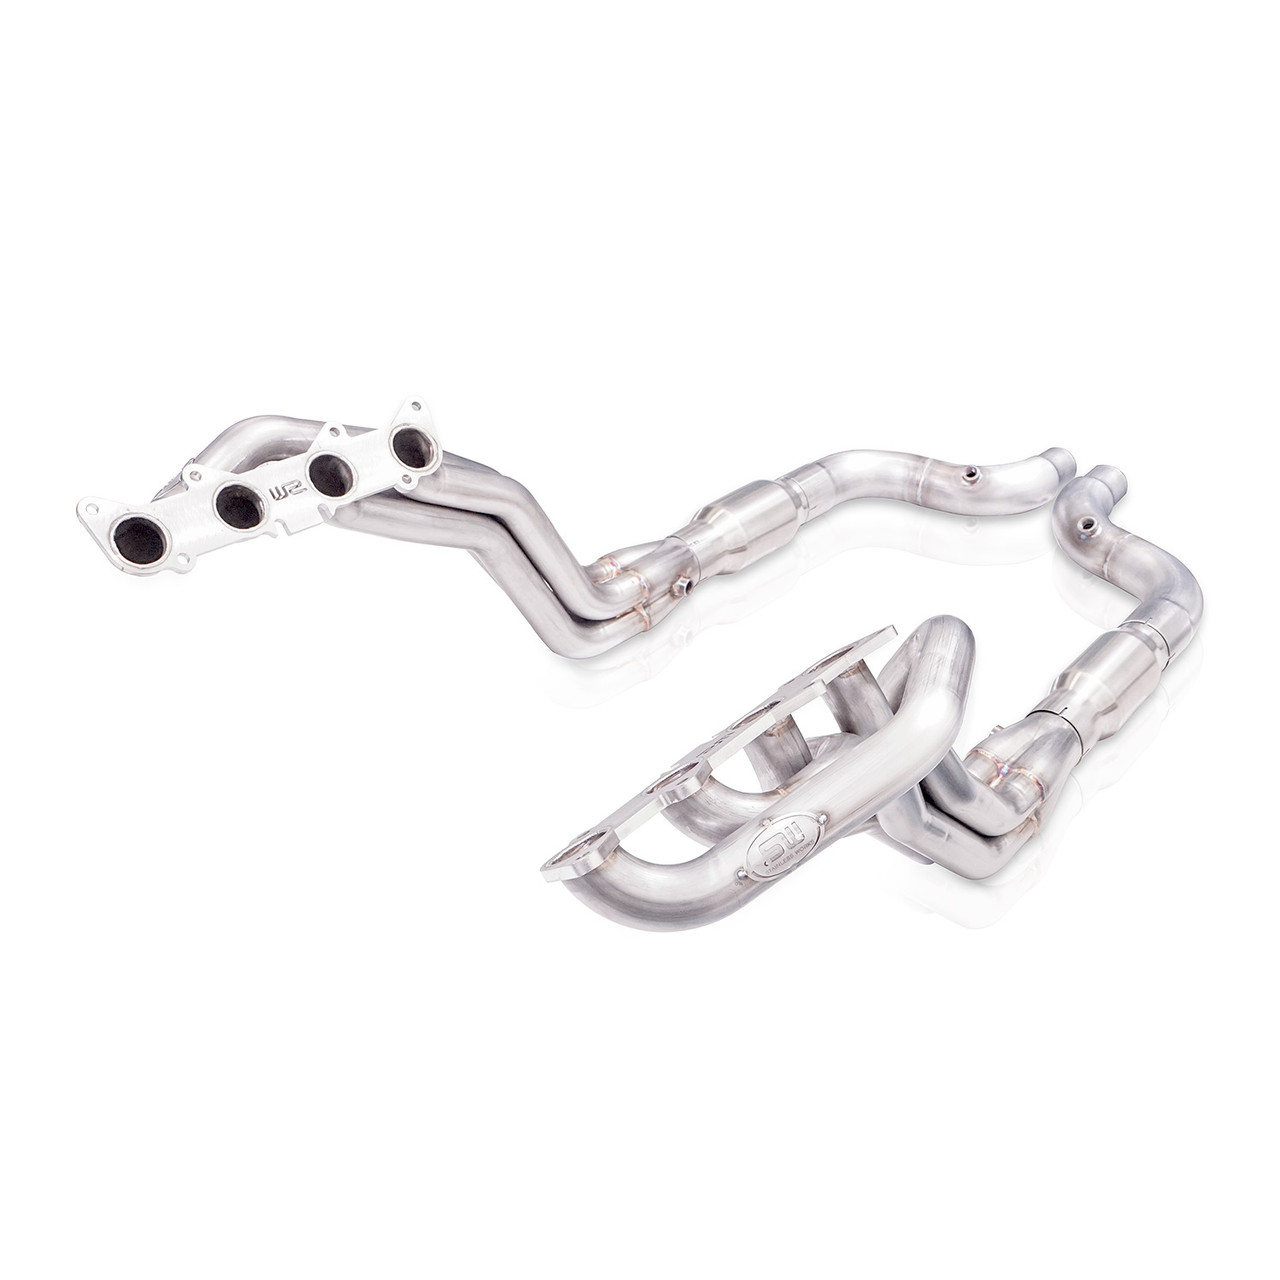 Stainless Power 1 7/8" Long Tube Headers w. High Flow Cats / Factory Connect - S550 Mustang GT